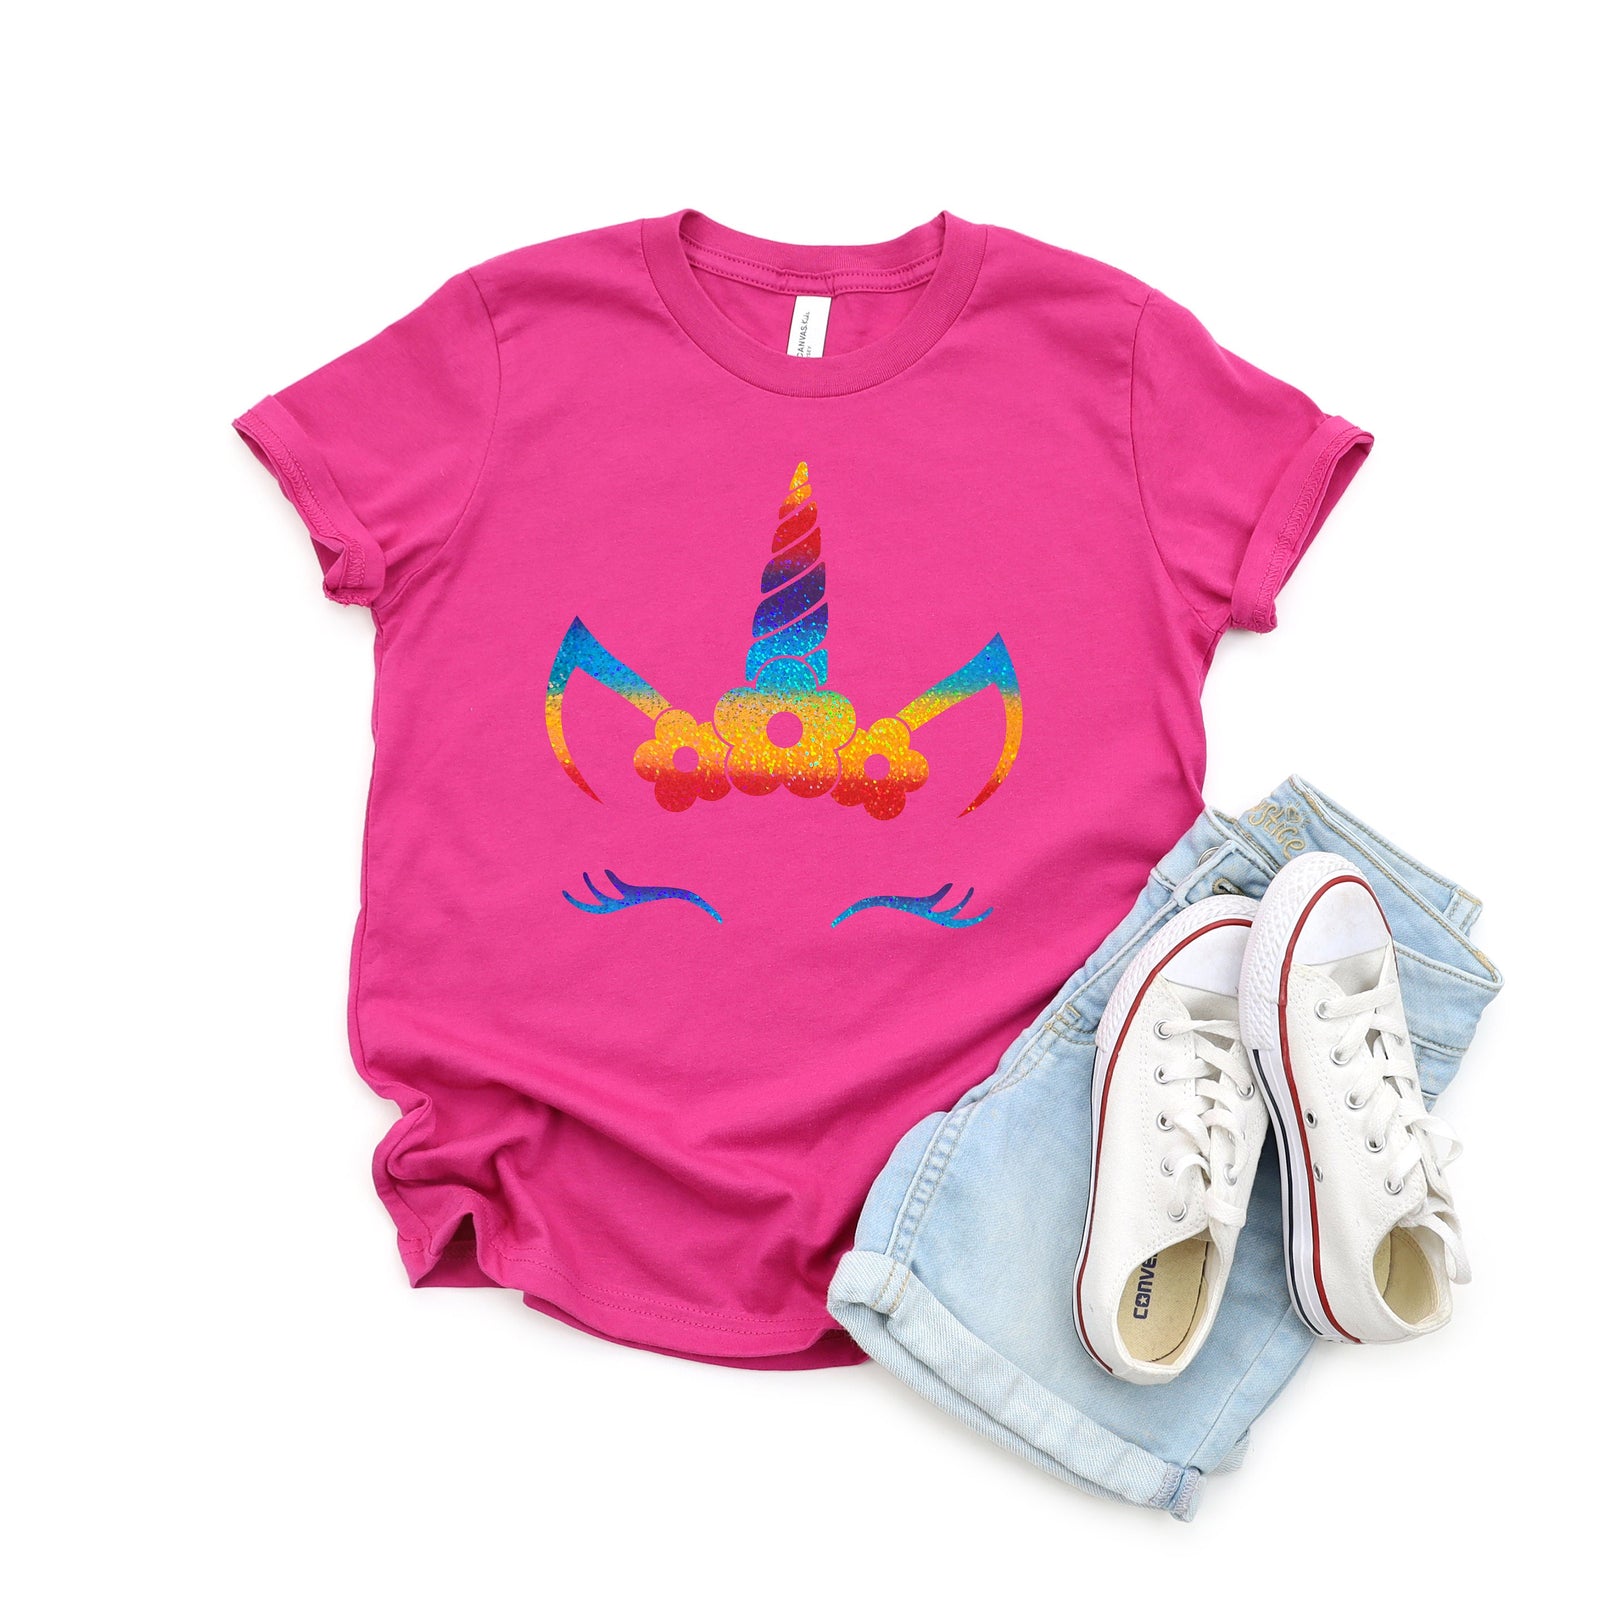 Unicorn T Shirt for Youth Girls - Birthday Party - Glitter - Colorful - Favor - Gift